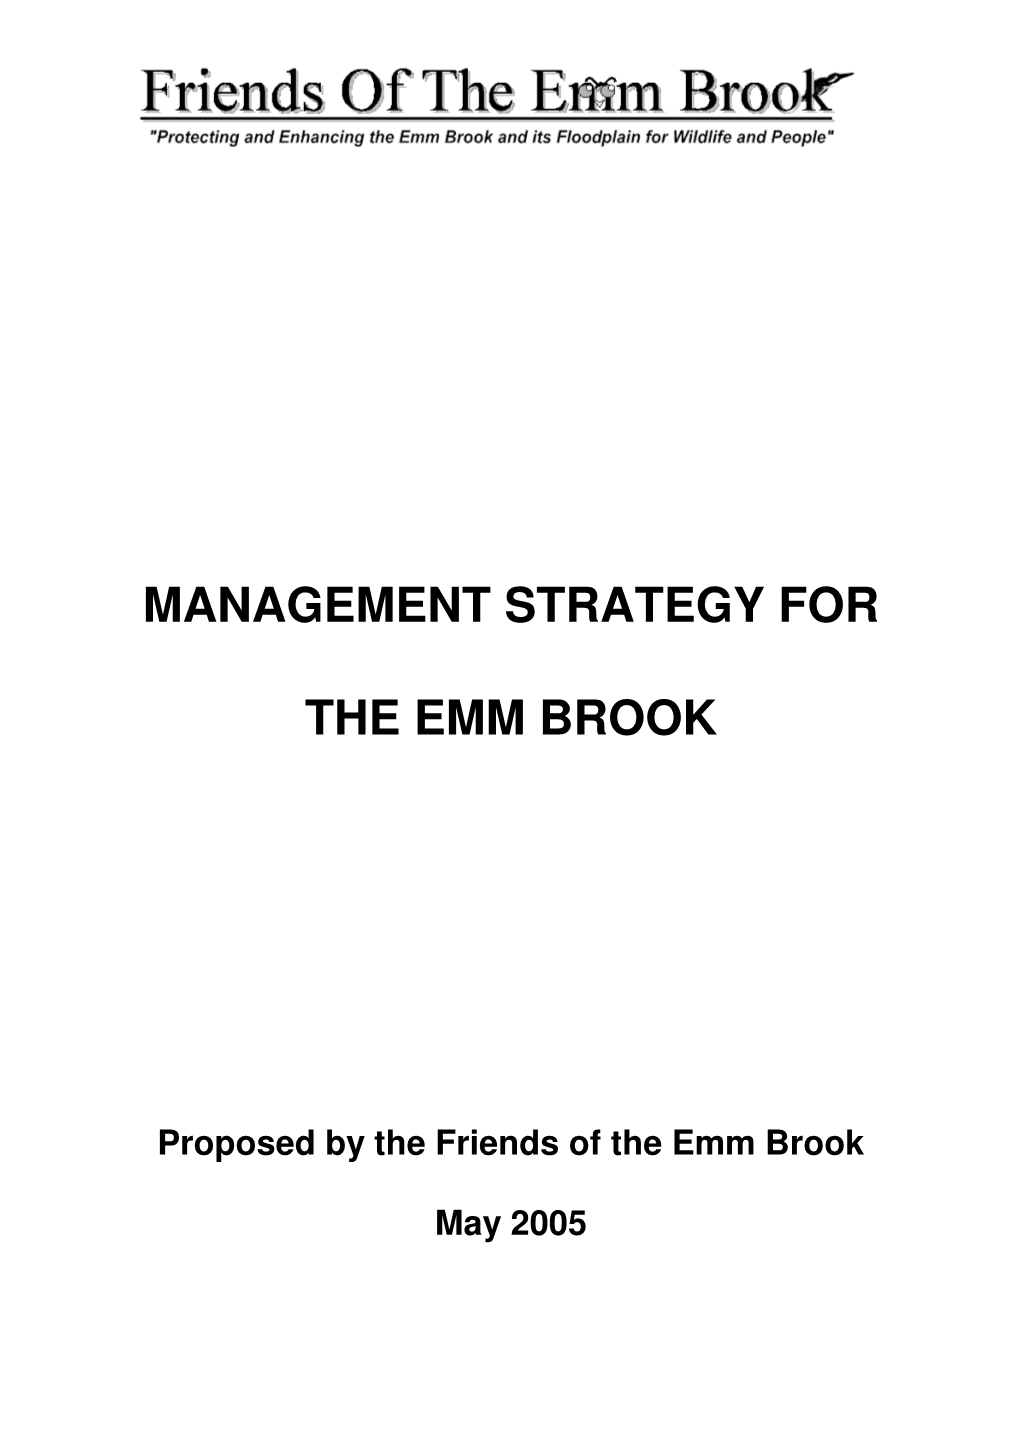 Management Strategy for the Emm Brook